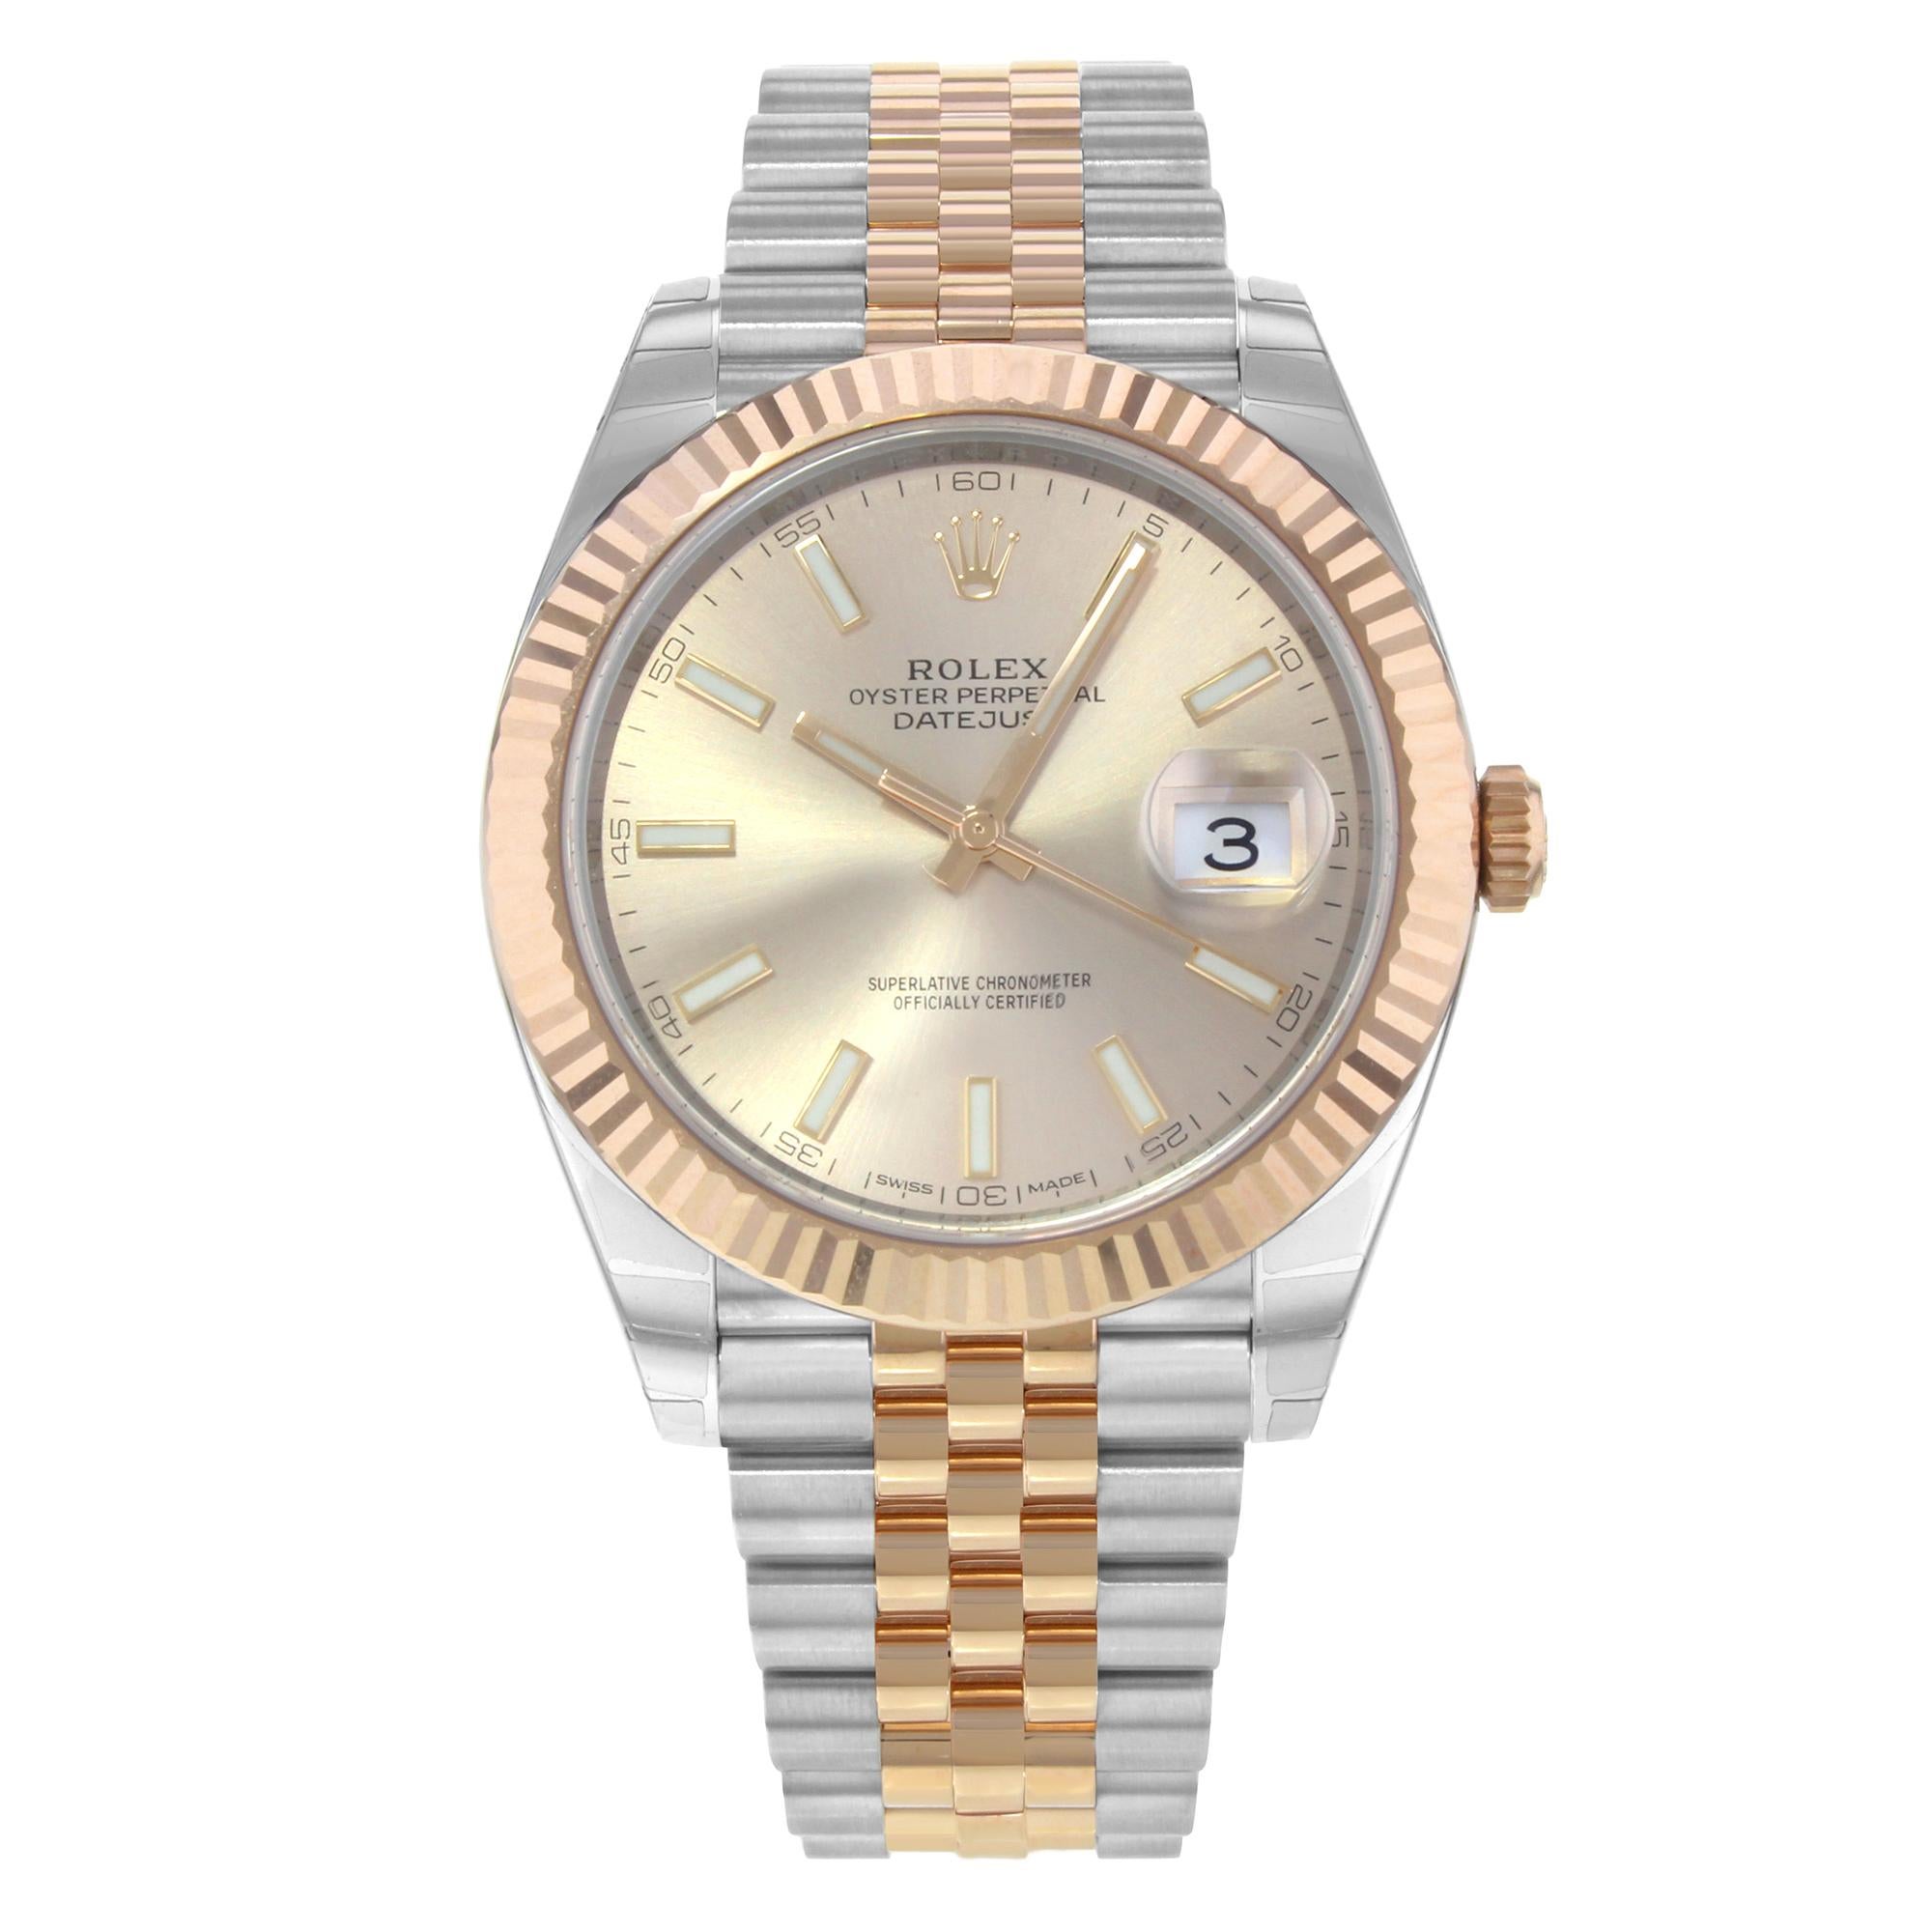 This brand new Rolex Datejust 41 126331  is a beautiful men's timepiece that is powered by an automatic movement which is cased in a stainless steel case. It has a round shape face, date dial, and has hand sticks style markers. It is completed with